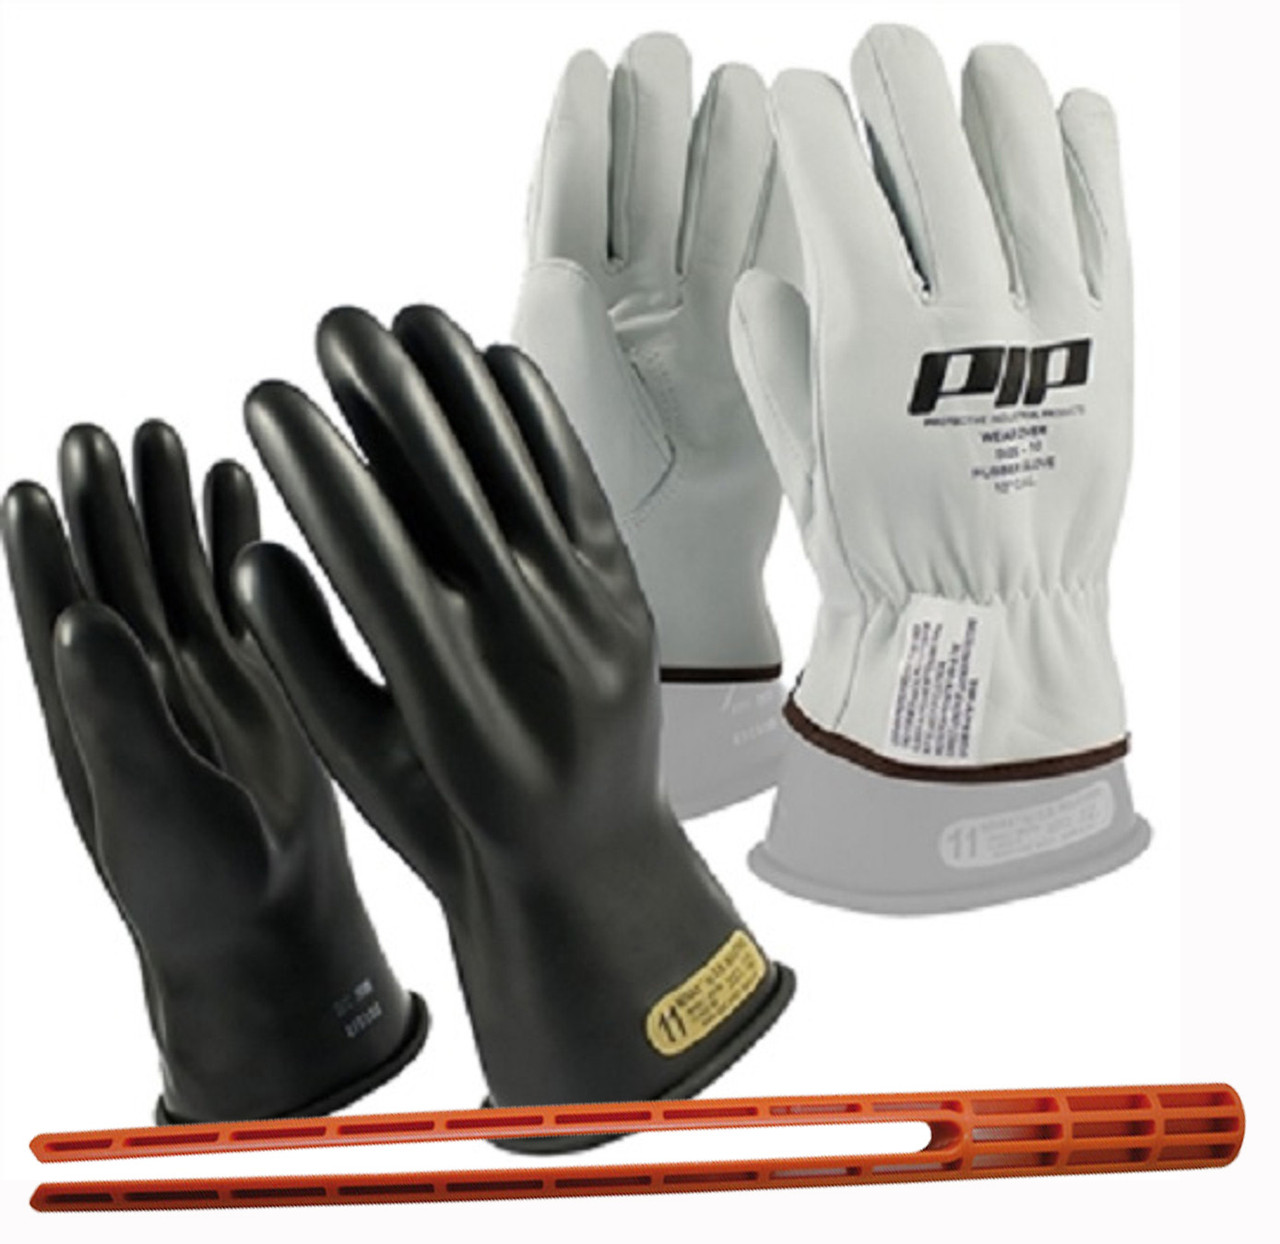 POWER GRIPZ Low-Voltage Leather Protector Gloves, 10